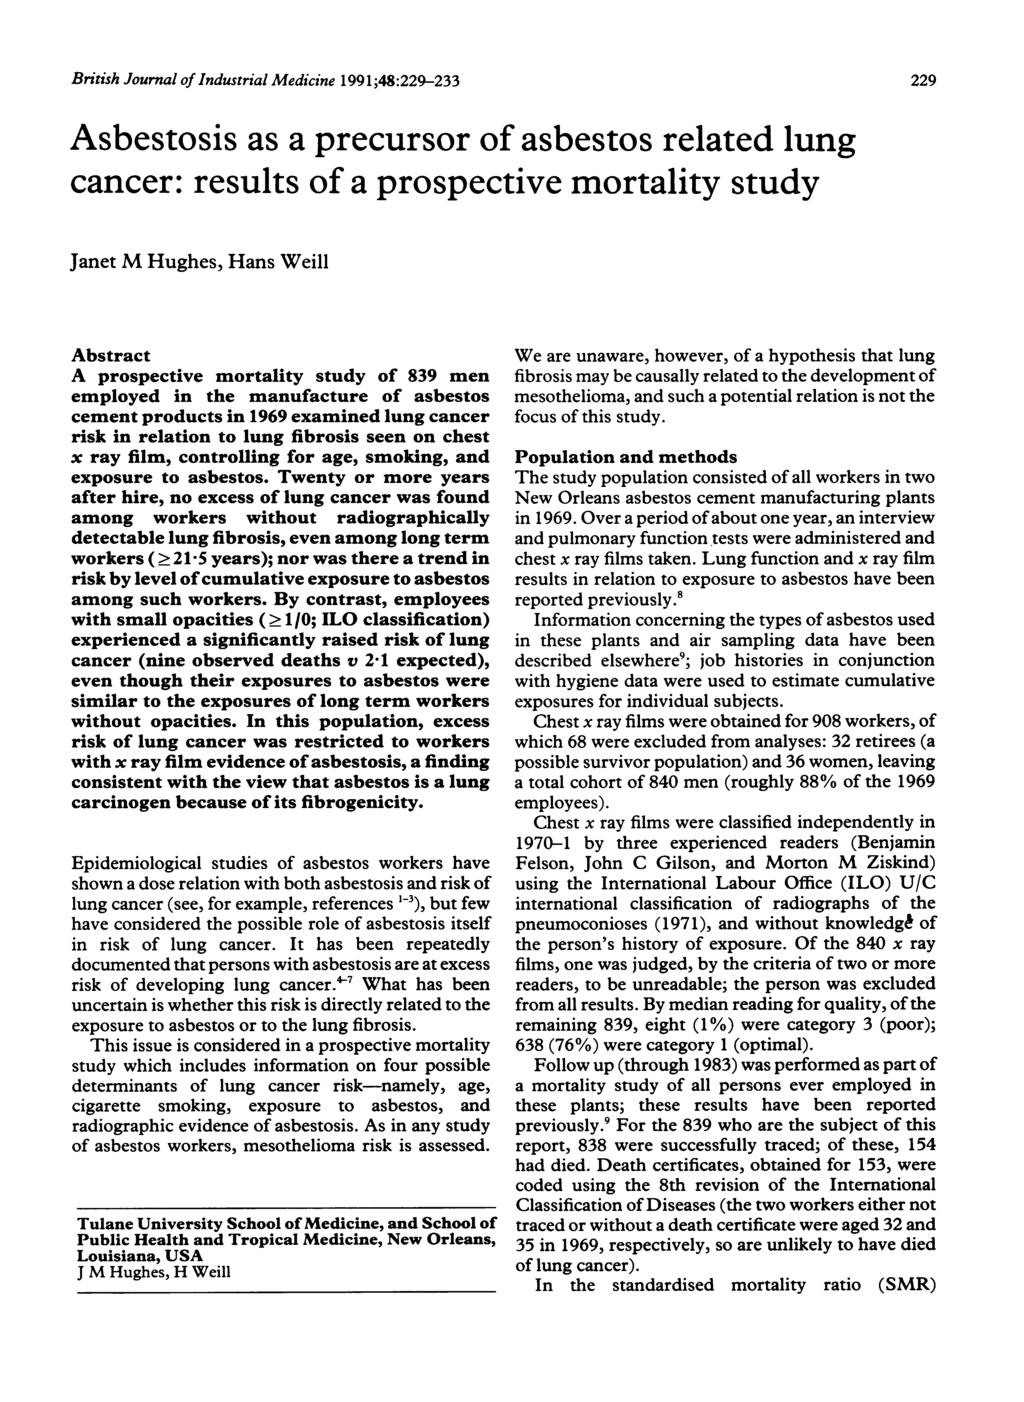 British Journal of Industrial Medicine 1991;48:229-233 Asbestosis as a precursor of asbestos related lung cancer: results of a prospective mortality study Janet M Hughes, Hans Weill Abstract A